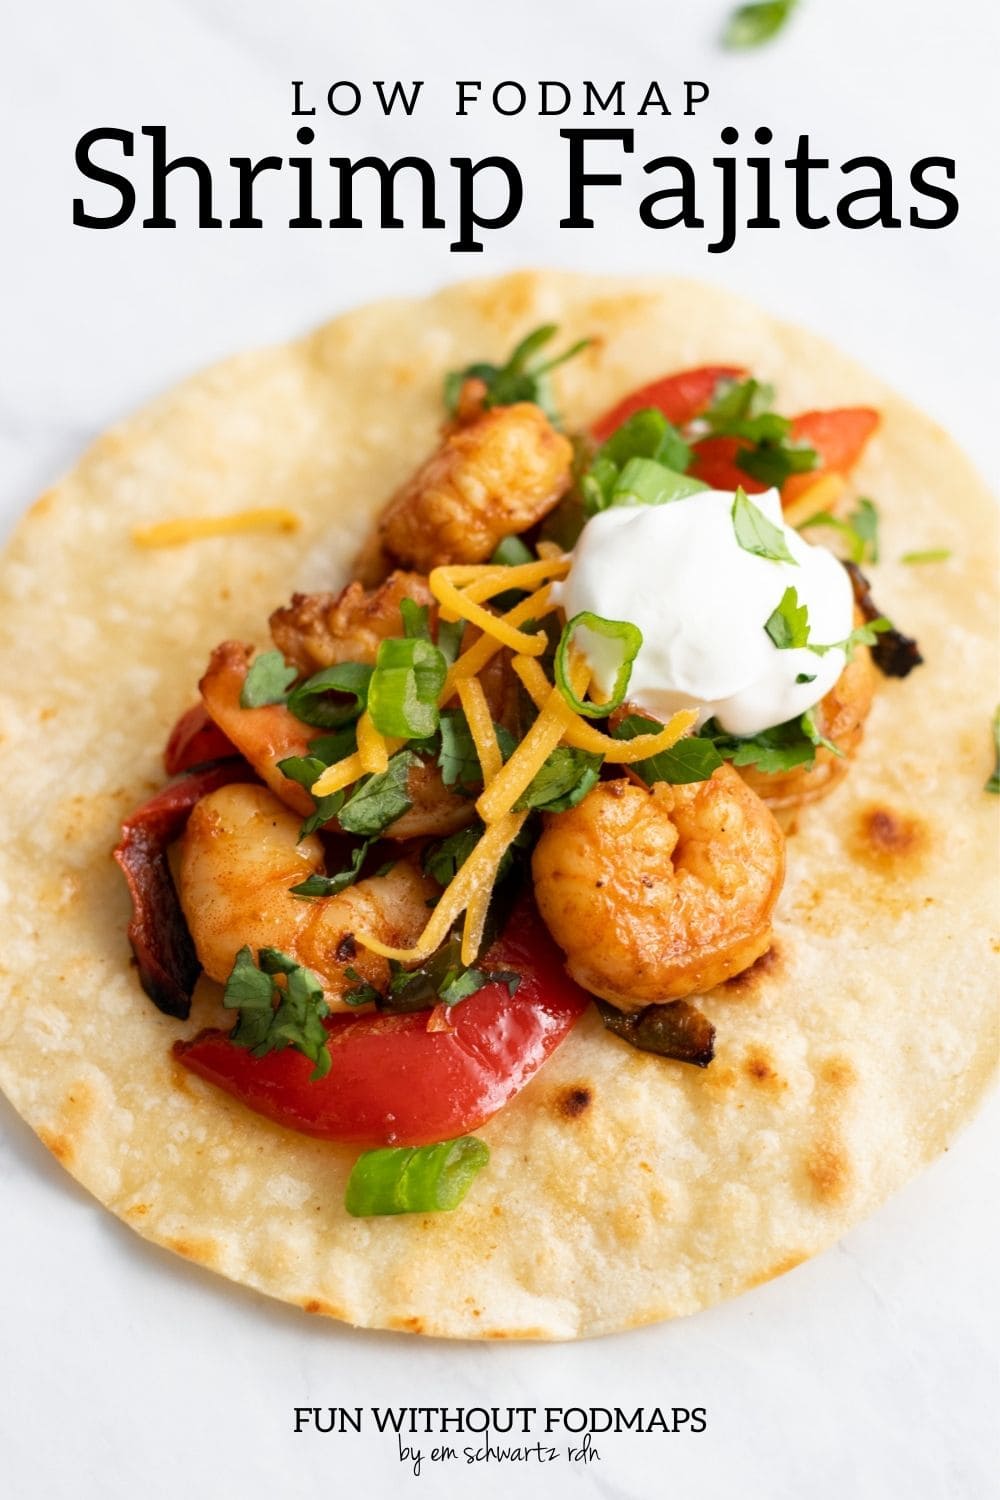 A corn tortilla topped with sautéed shrimp and bell peppers, shredded cheddar cheese, sour cream, cilantro, and sliced green onion tops. In the white space above, a black text overlay reads "Low FODMAP Shrimp Fajitas."